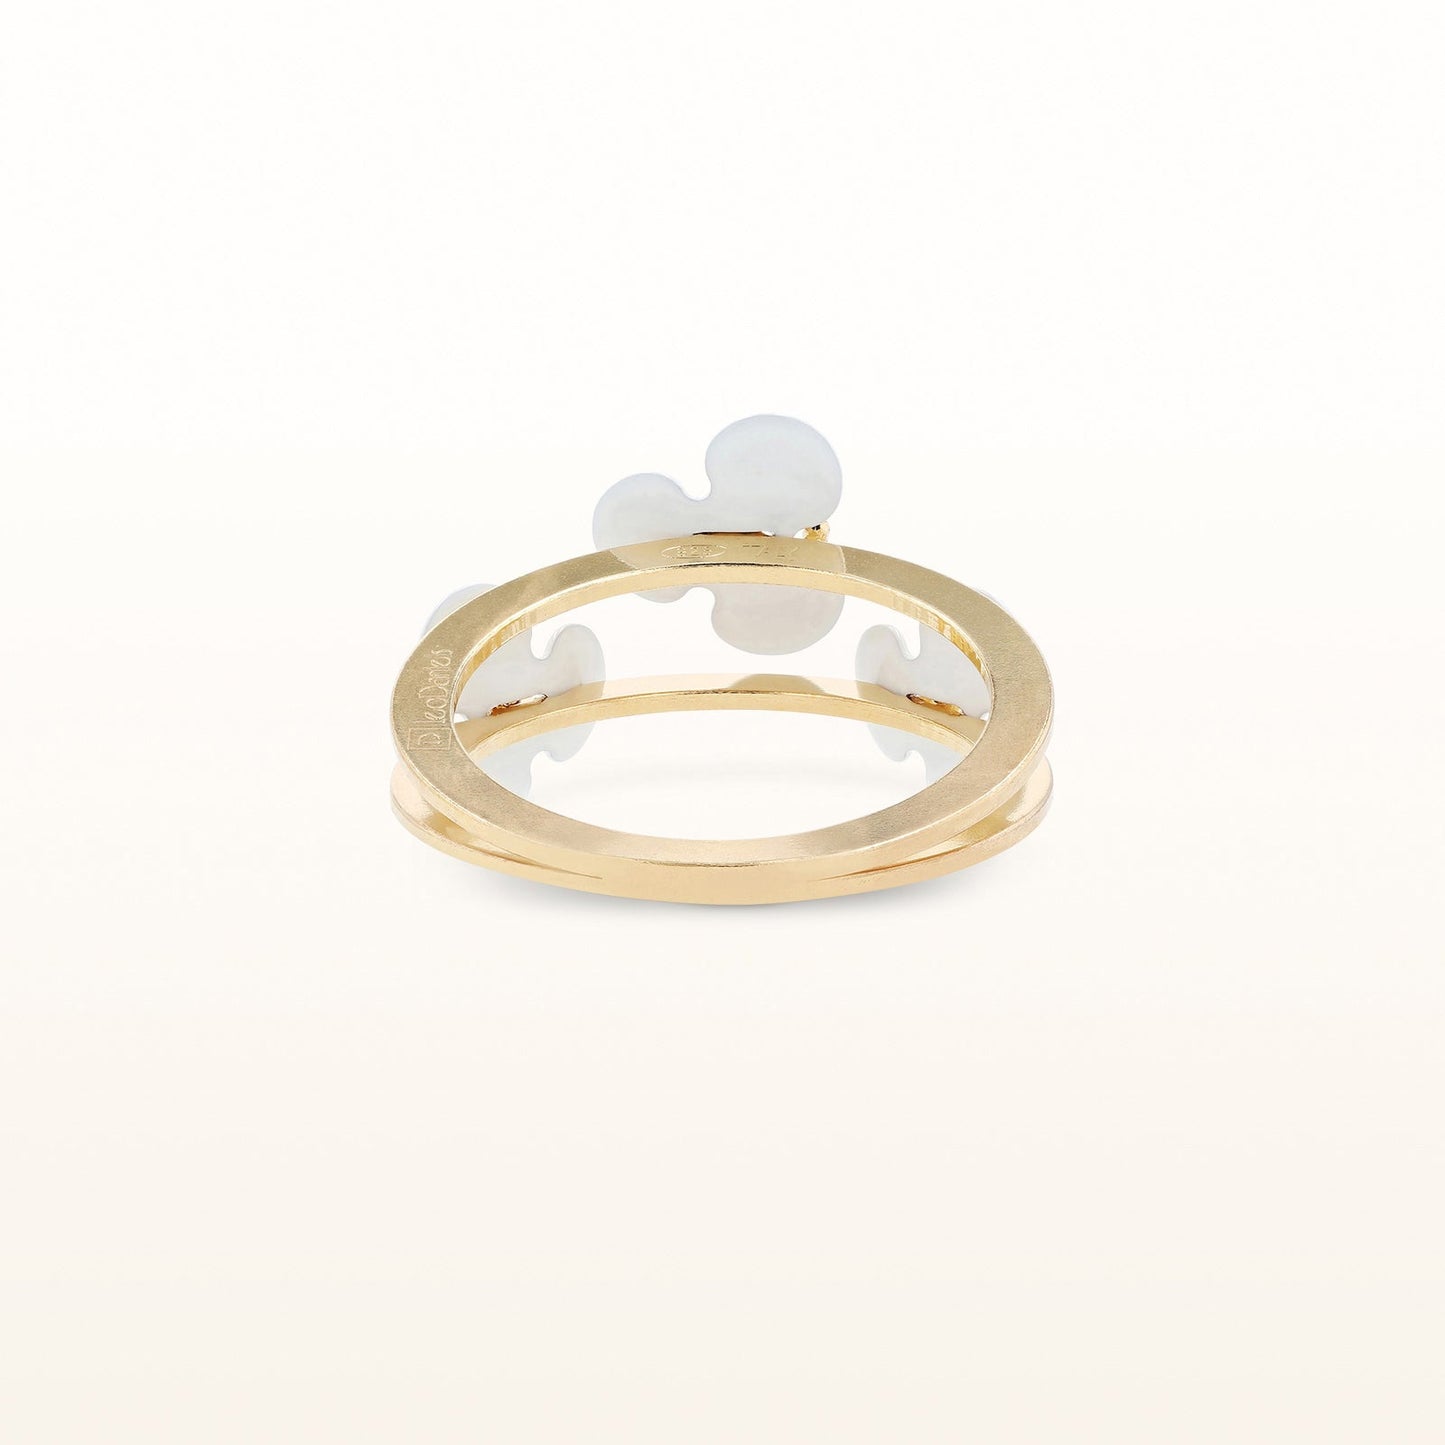 Flower Ring in Yellow Gold Plated Sterling Silver